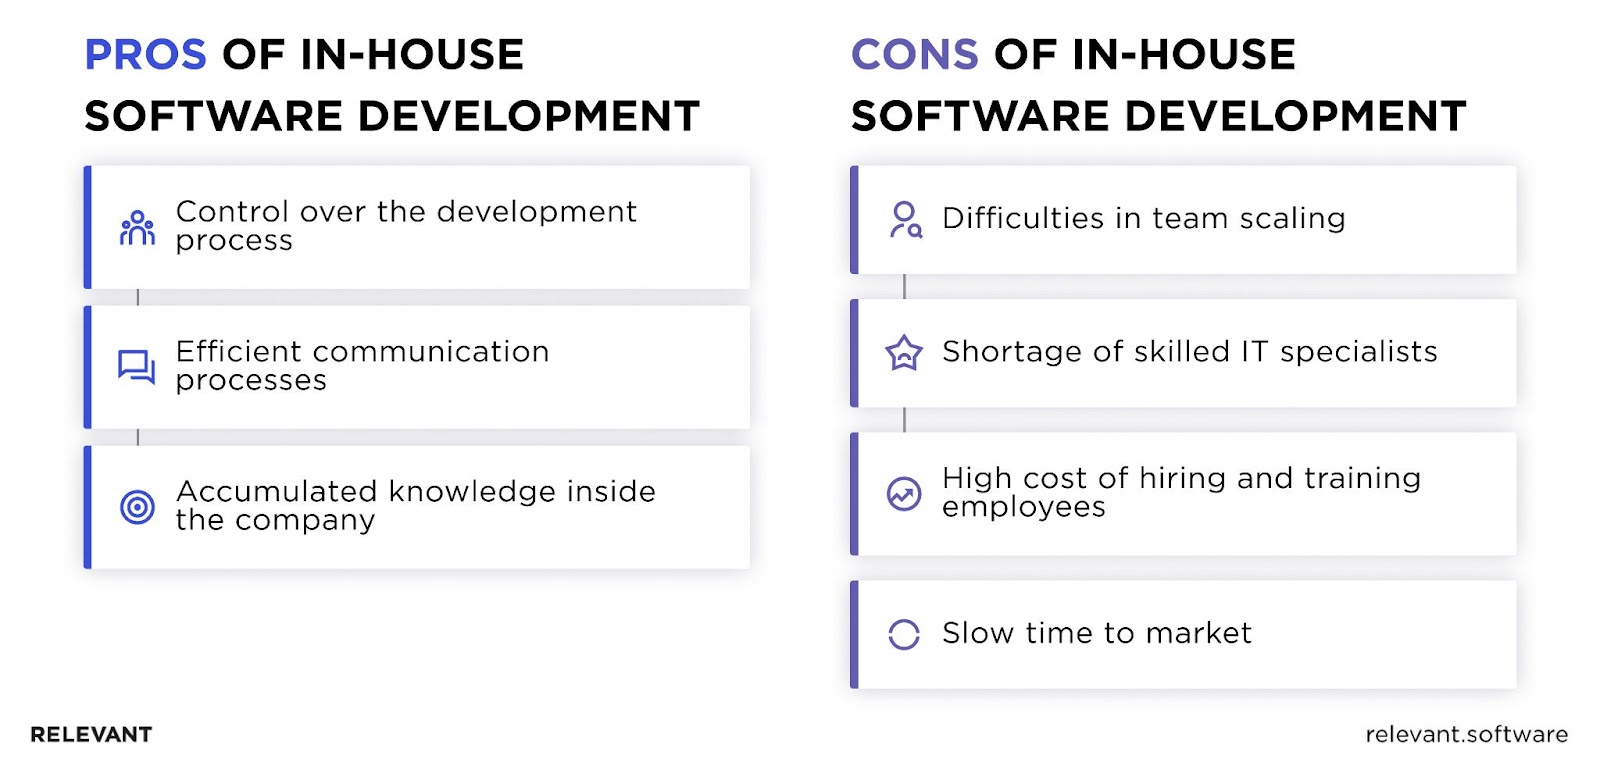 pros and cons of in-house development